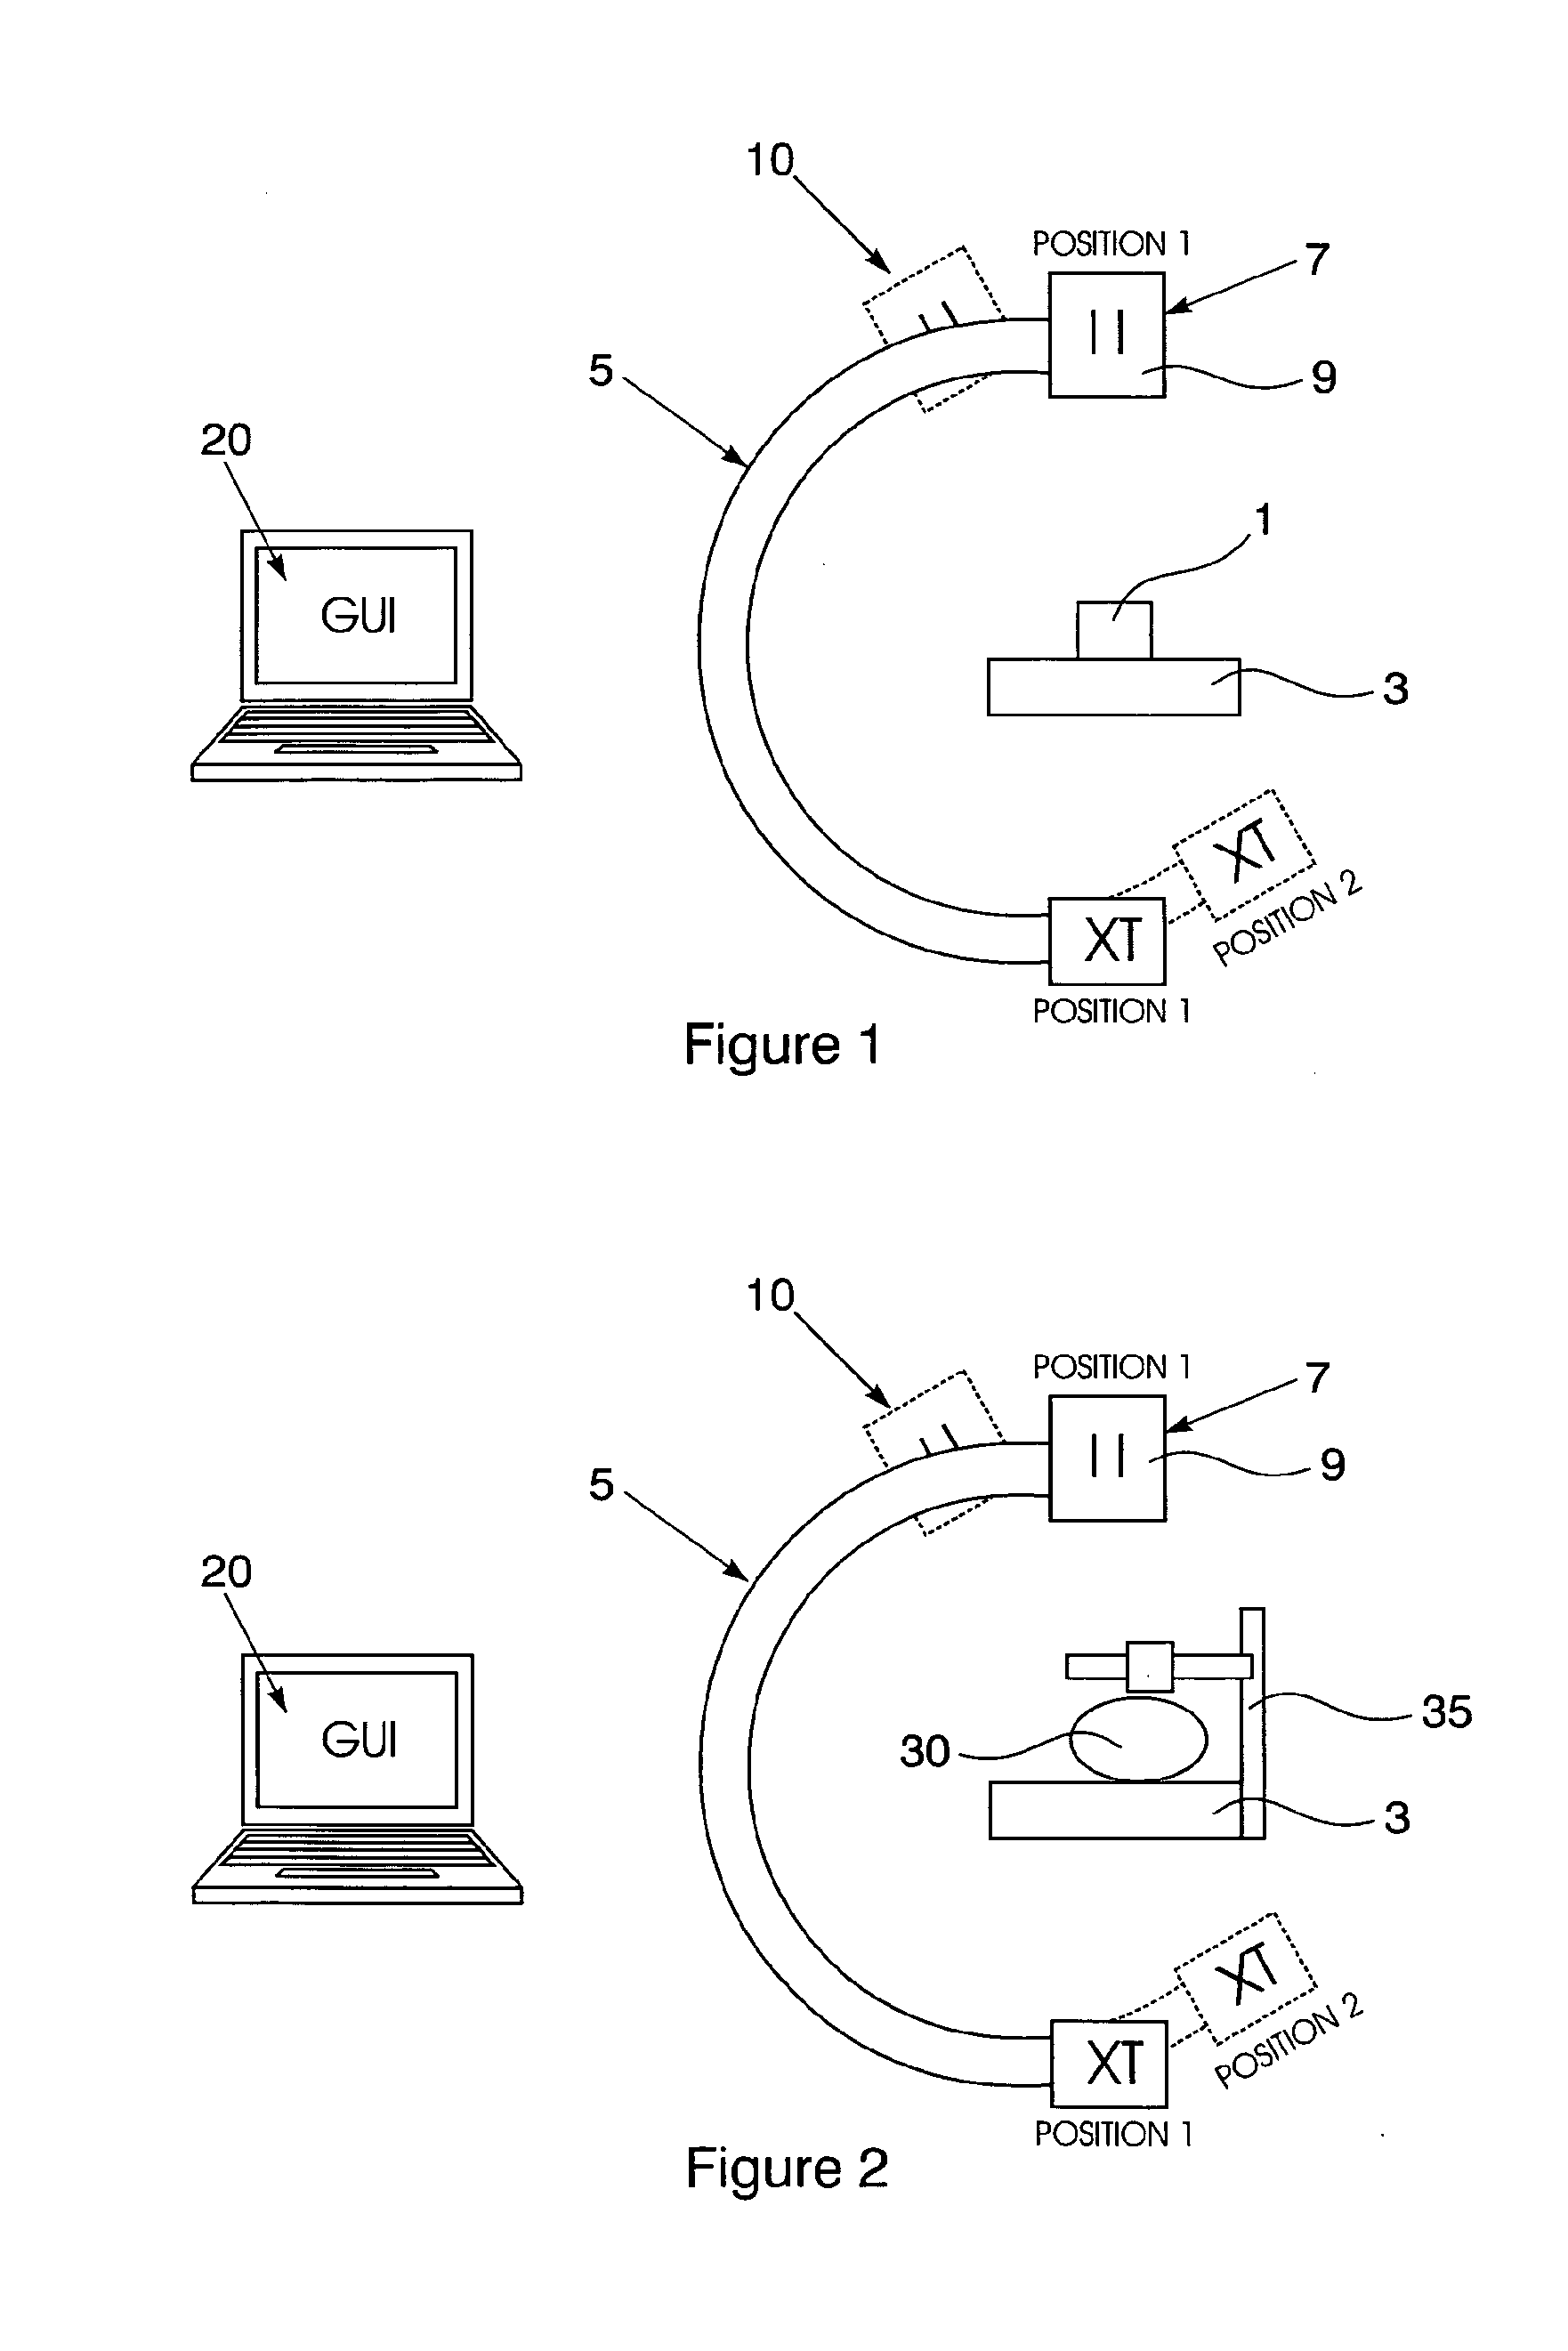 Method for positioning an instrument